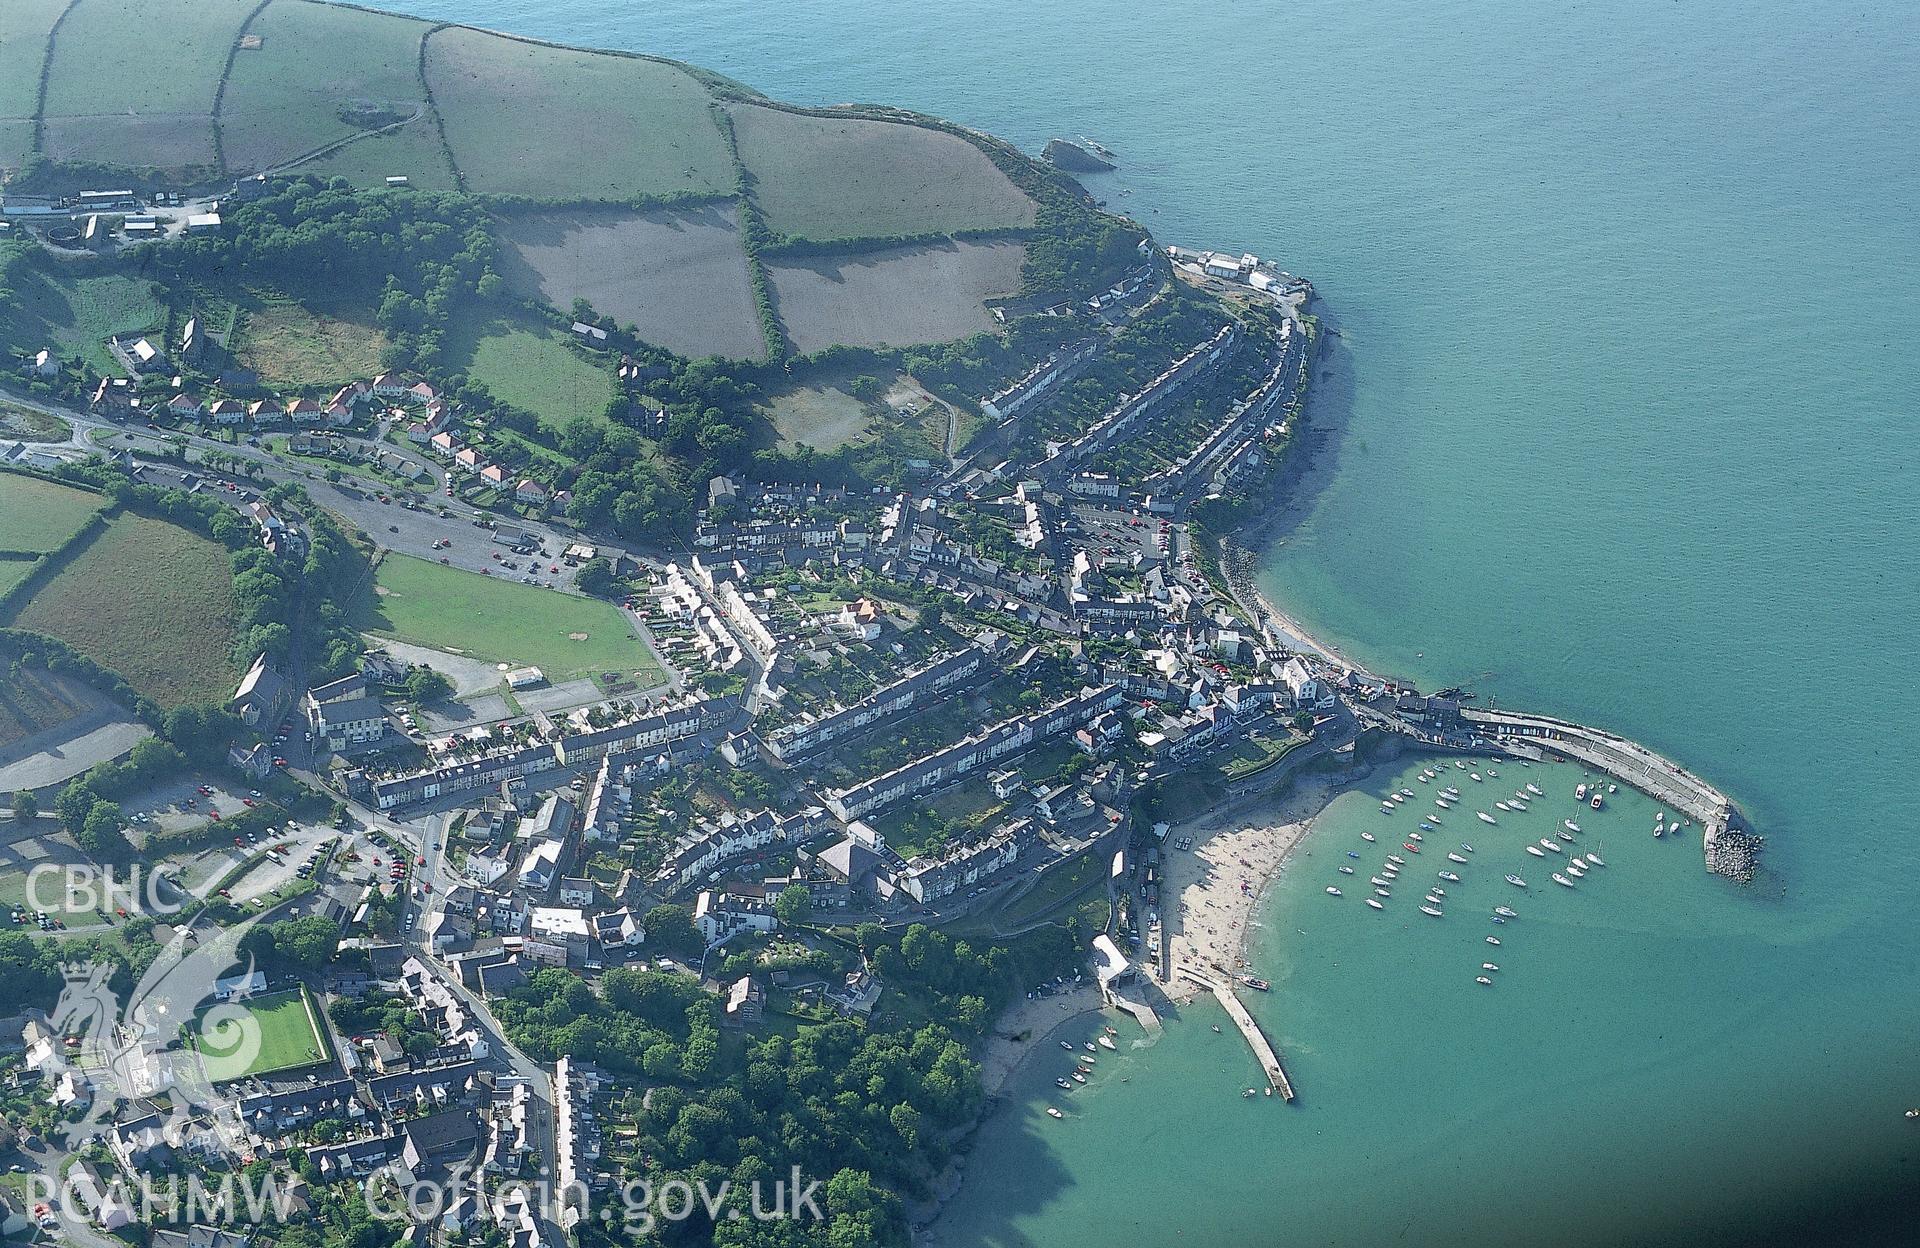 Slide of RCAHMW colour oblique aerial photograph of New Quay, taken by Chris Musson, 1985.